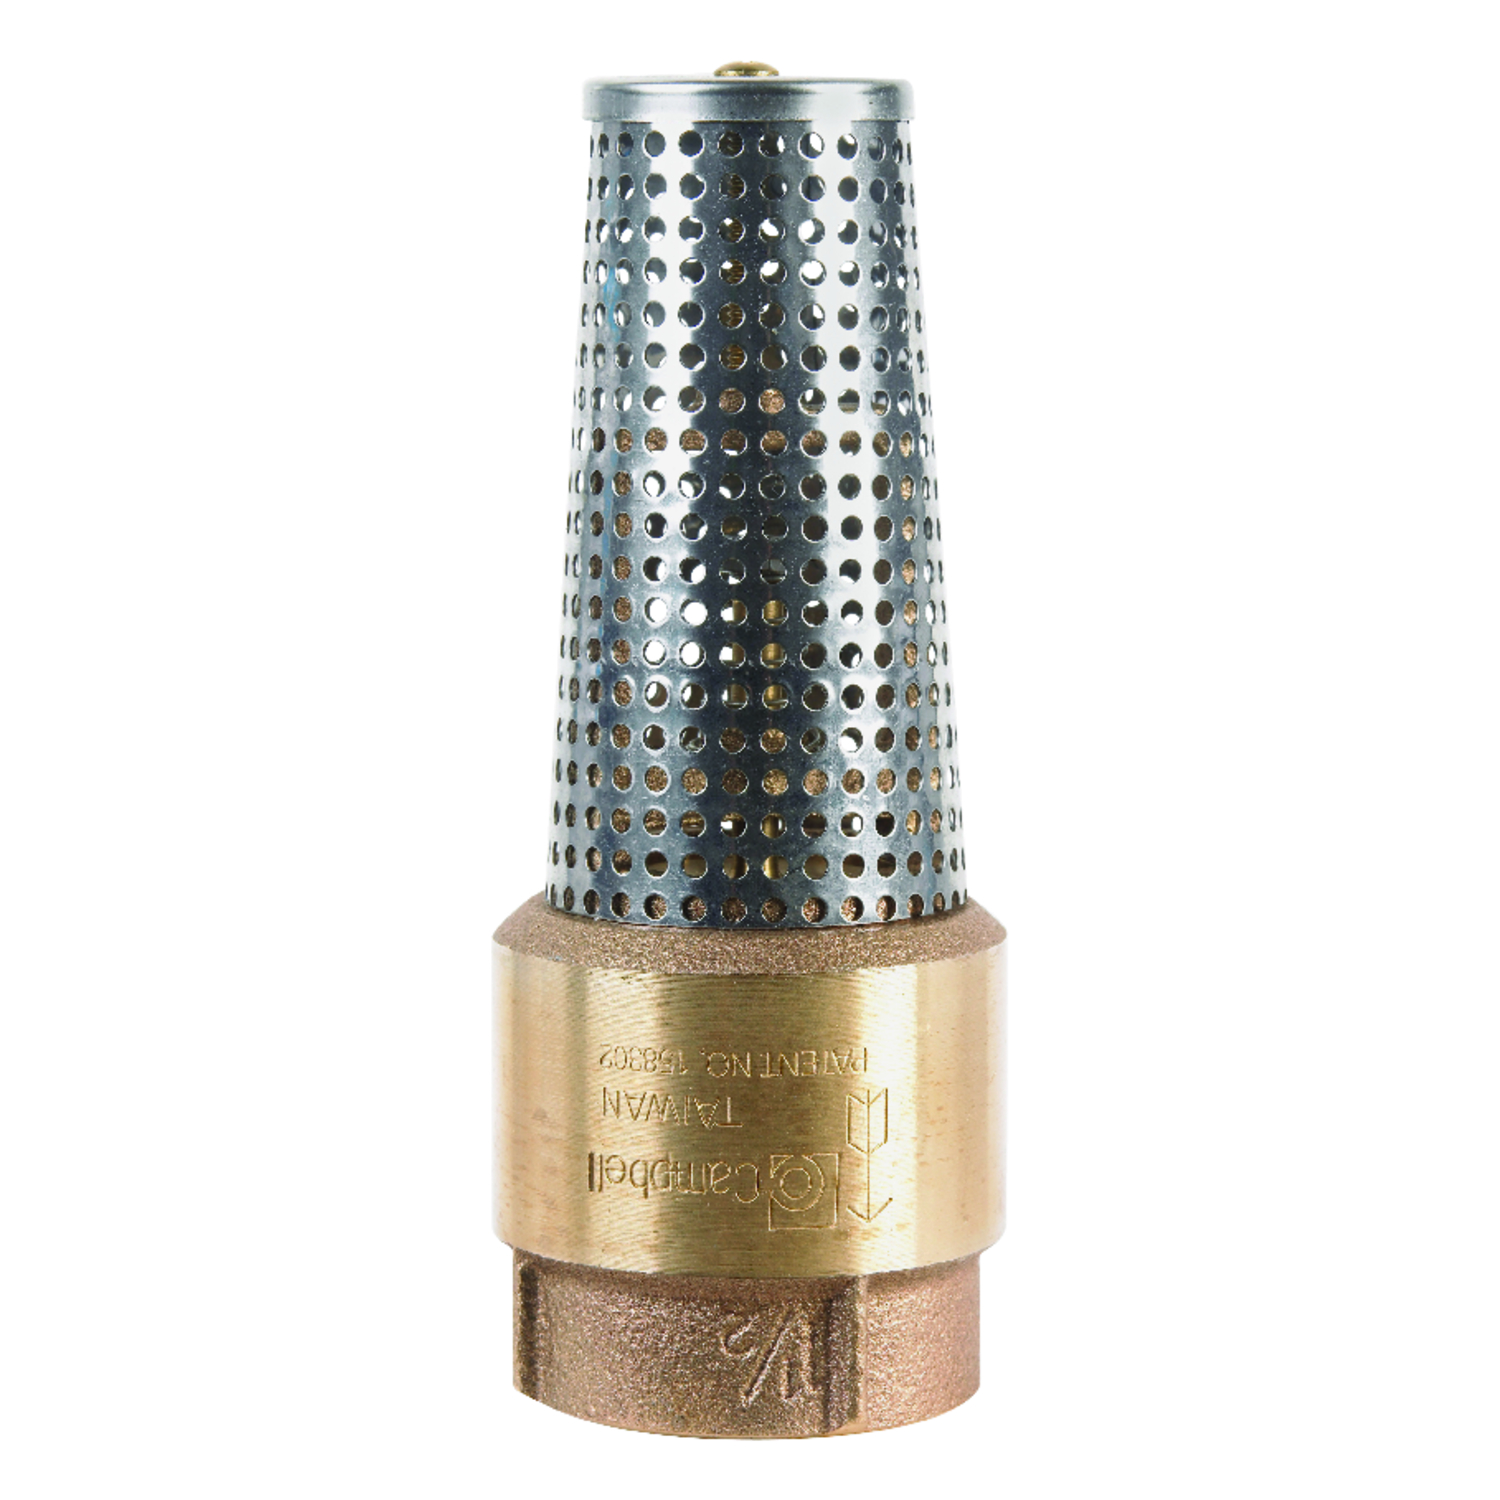 Photos - Other sanitary accessories Campbell 1-1/2 in. D X 1-1/2 in. D FNPT x FNPT Brass Foot Valve FV-6TLF